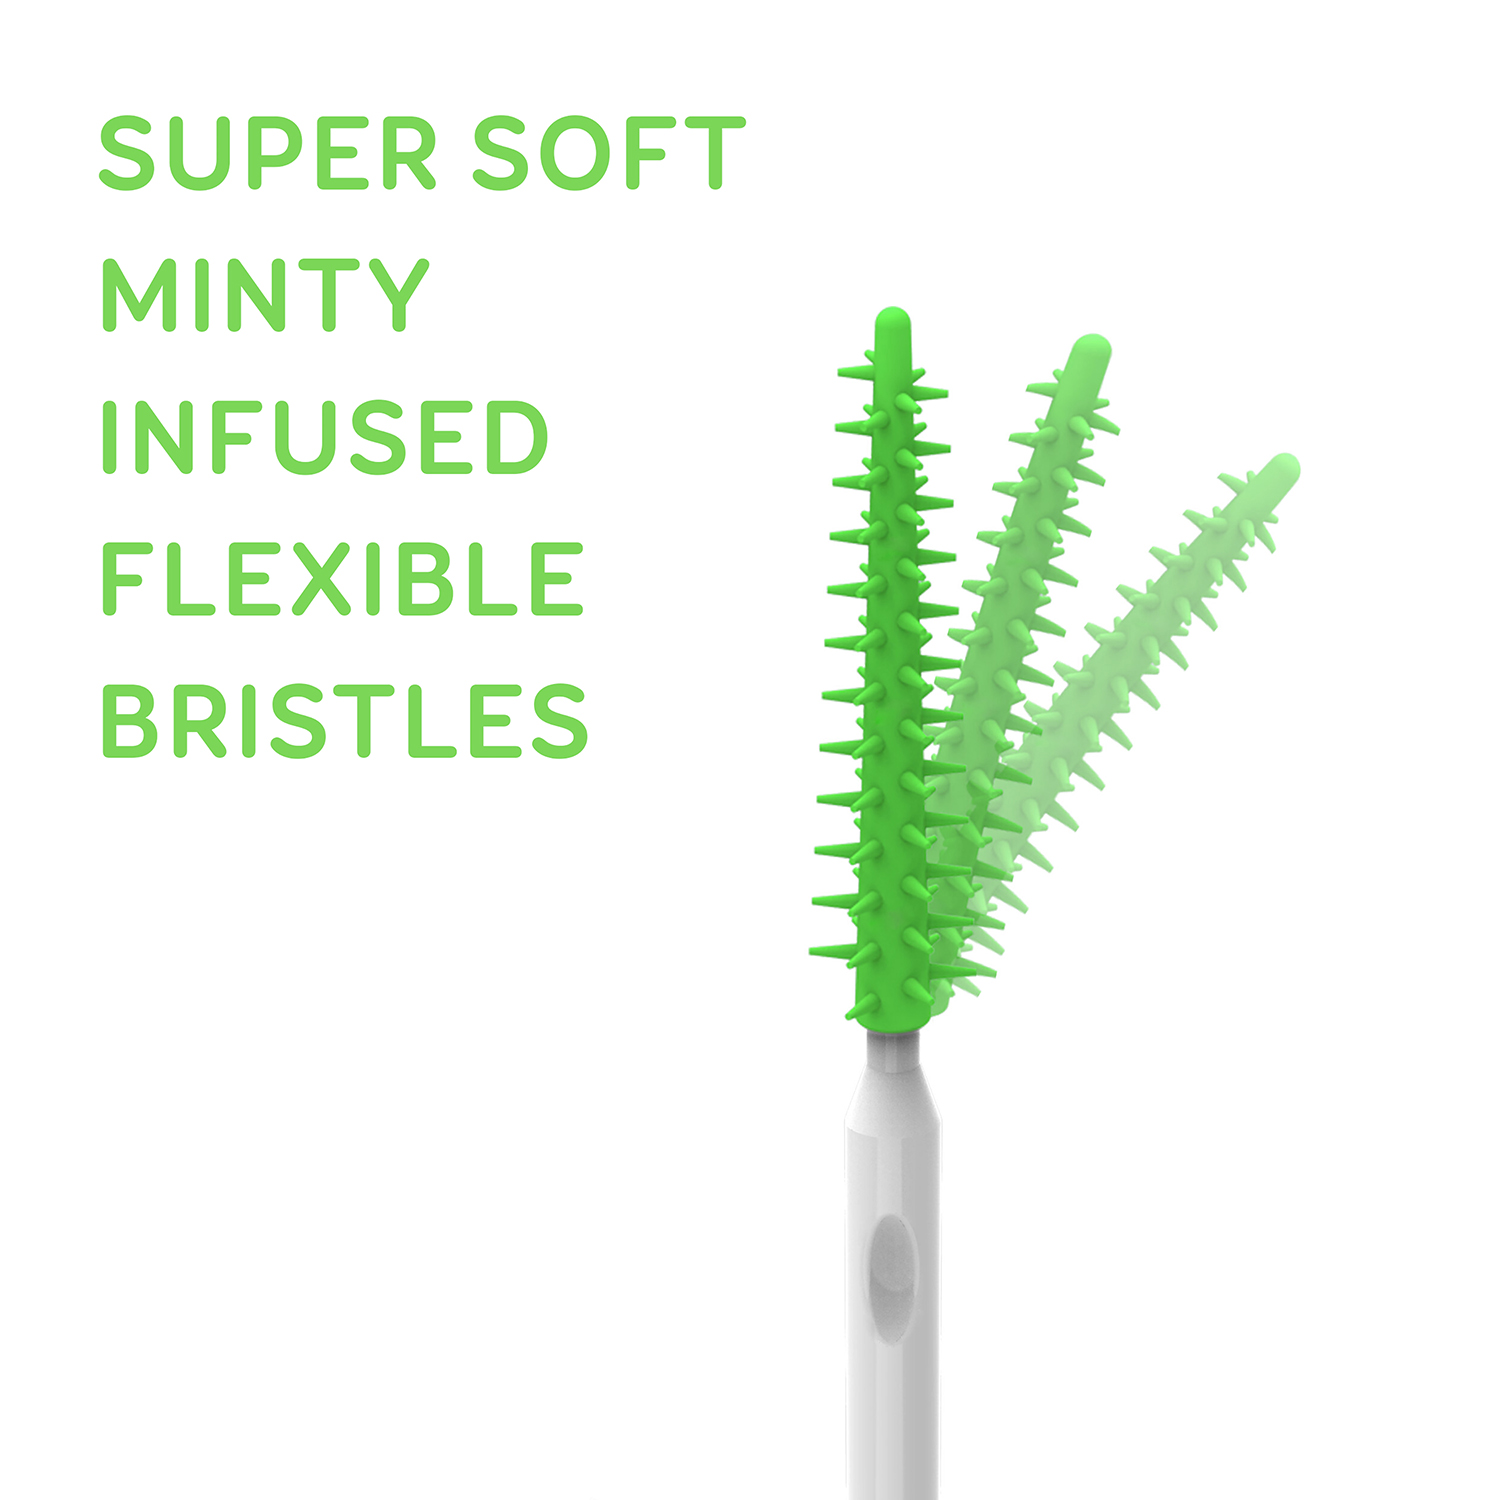 Grin Oral Care Minty Softstx